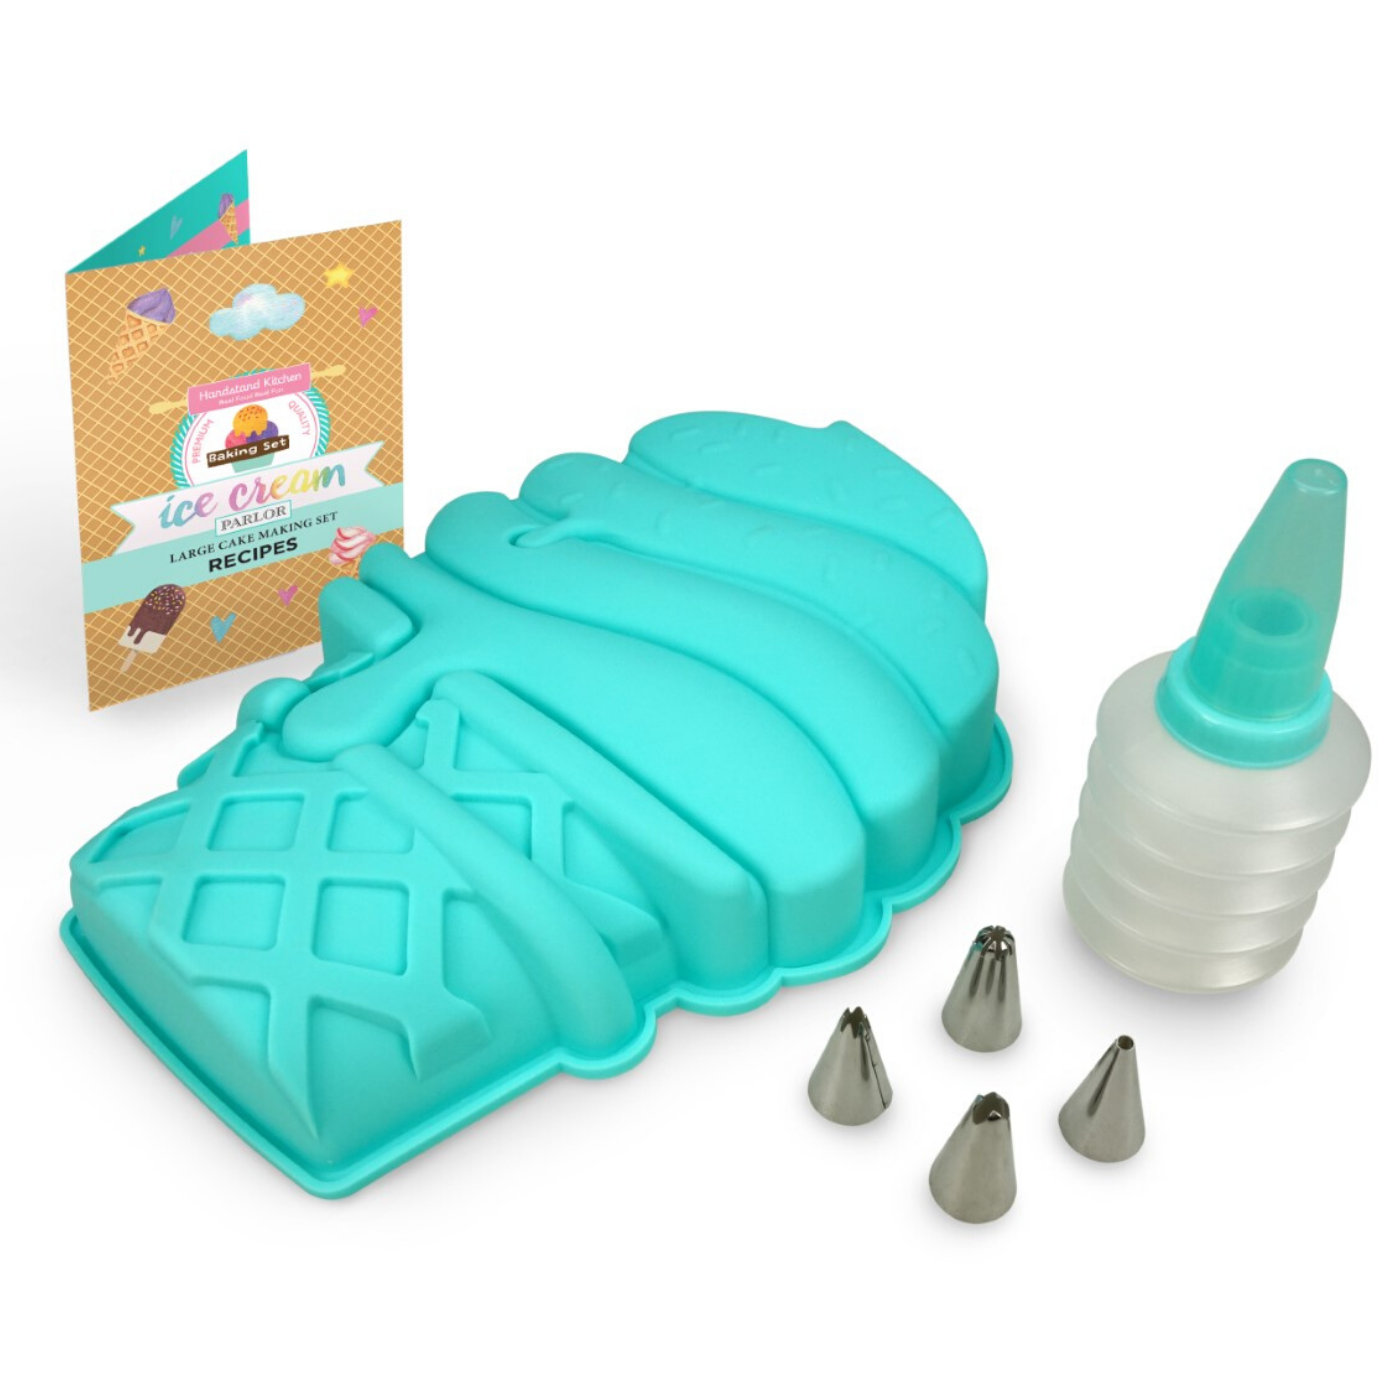 Out of box image of Ice Cream Parlor Large Cake Making Set including:  1 large silicone Ice cream cone shaped cake mold, frosting bottle with 4 tips, and recipe leaflet